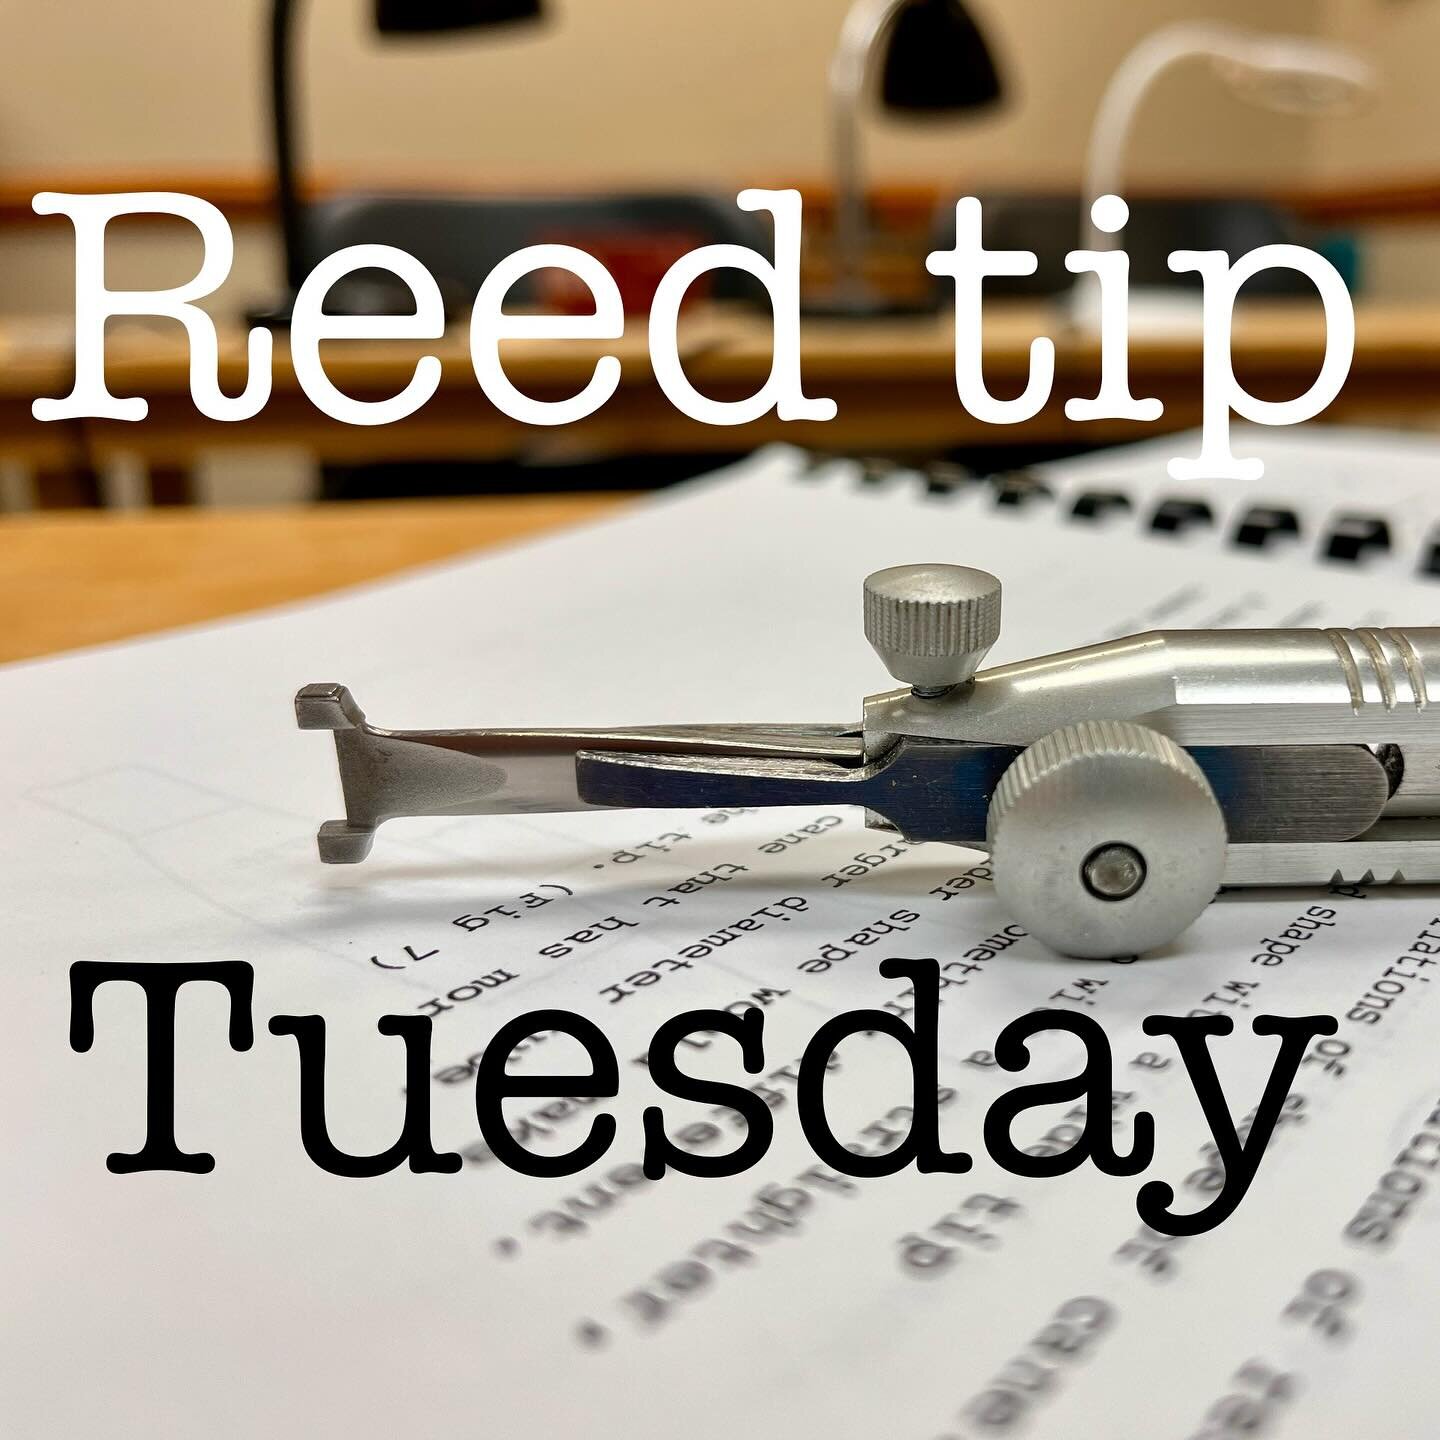 🛎️Reed tip Tuesday! 

Pay attention to the blend between the heart/hump and tip. This is important since it helps ensure consistent and smooth vibrations throughout the reed, which will affects the tone quality, response and general stability of the